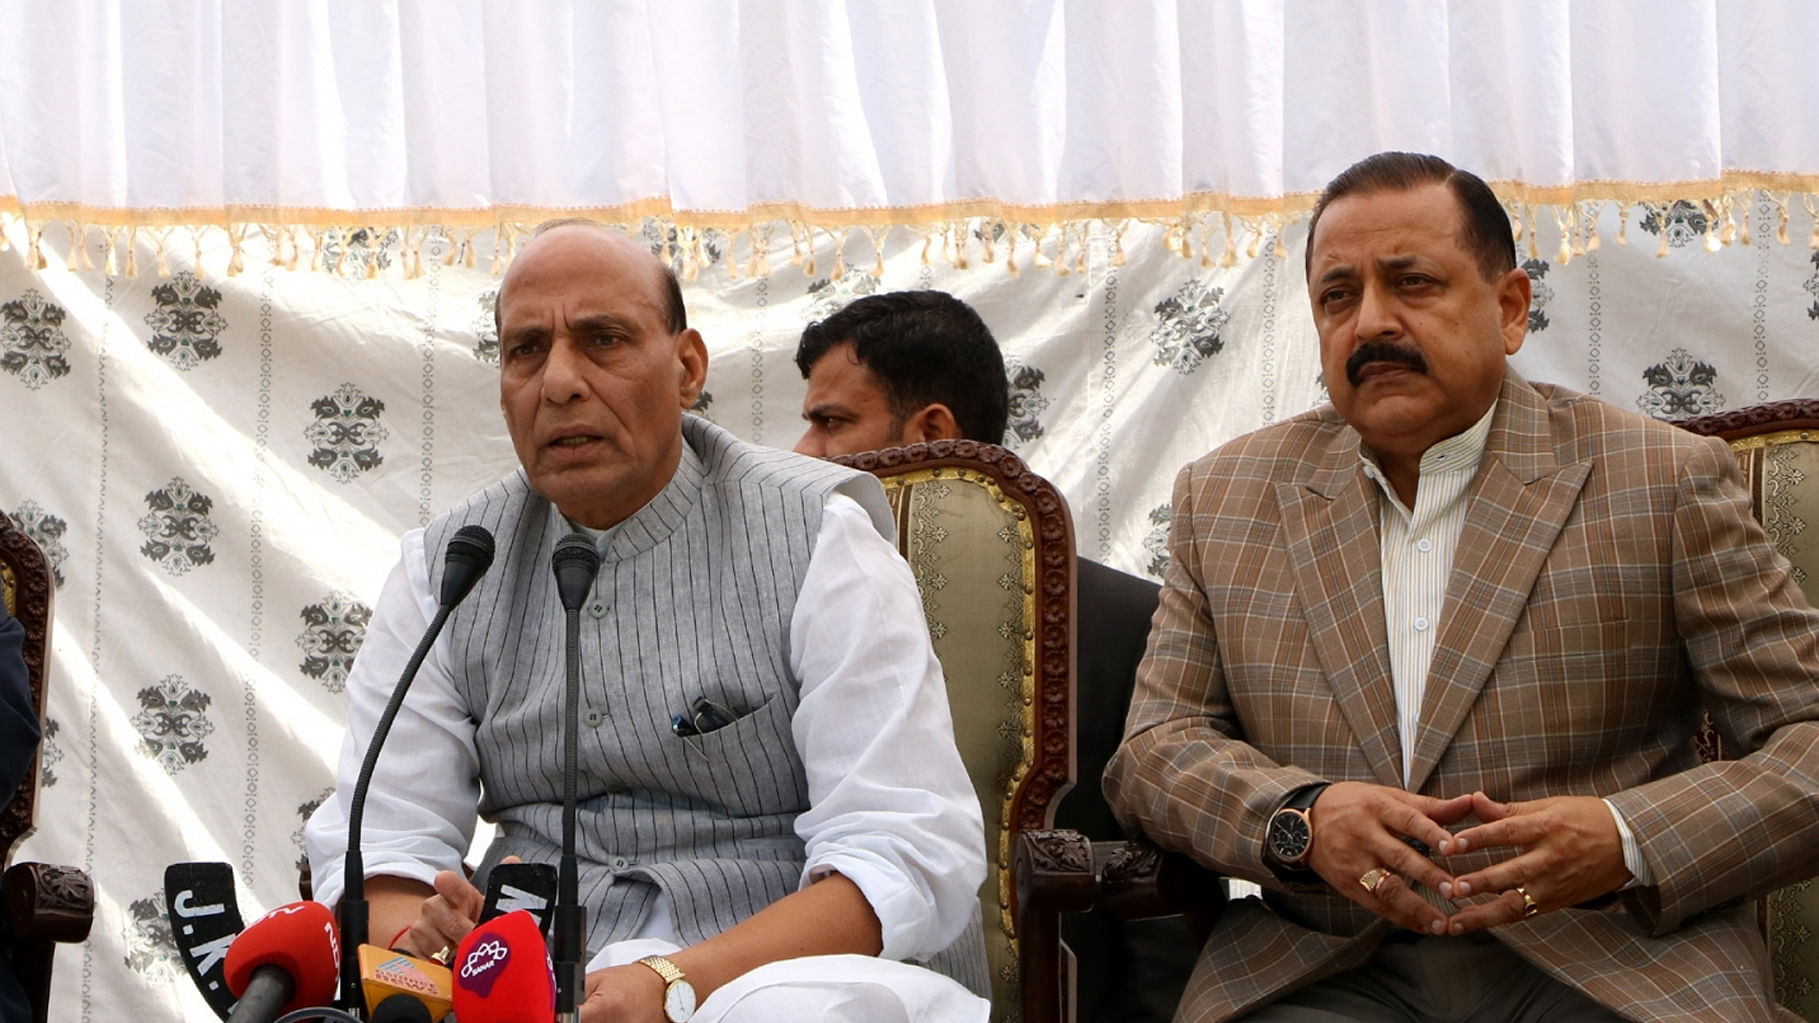 Home Minister Rajnath Singh was in Srinagar on Monday where he spoke on the Kashmir situation. (Photo: IANS)